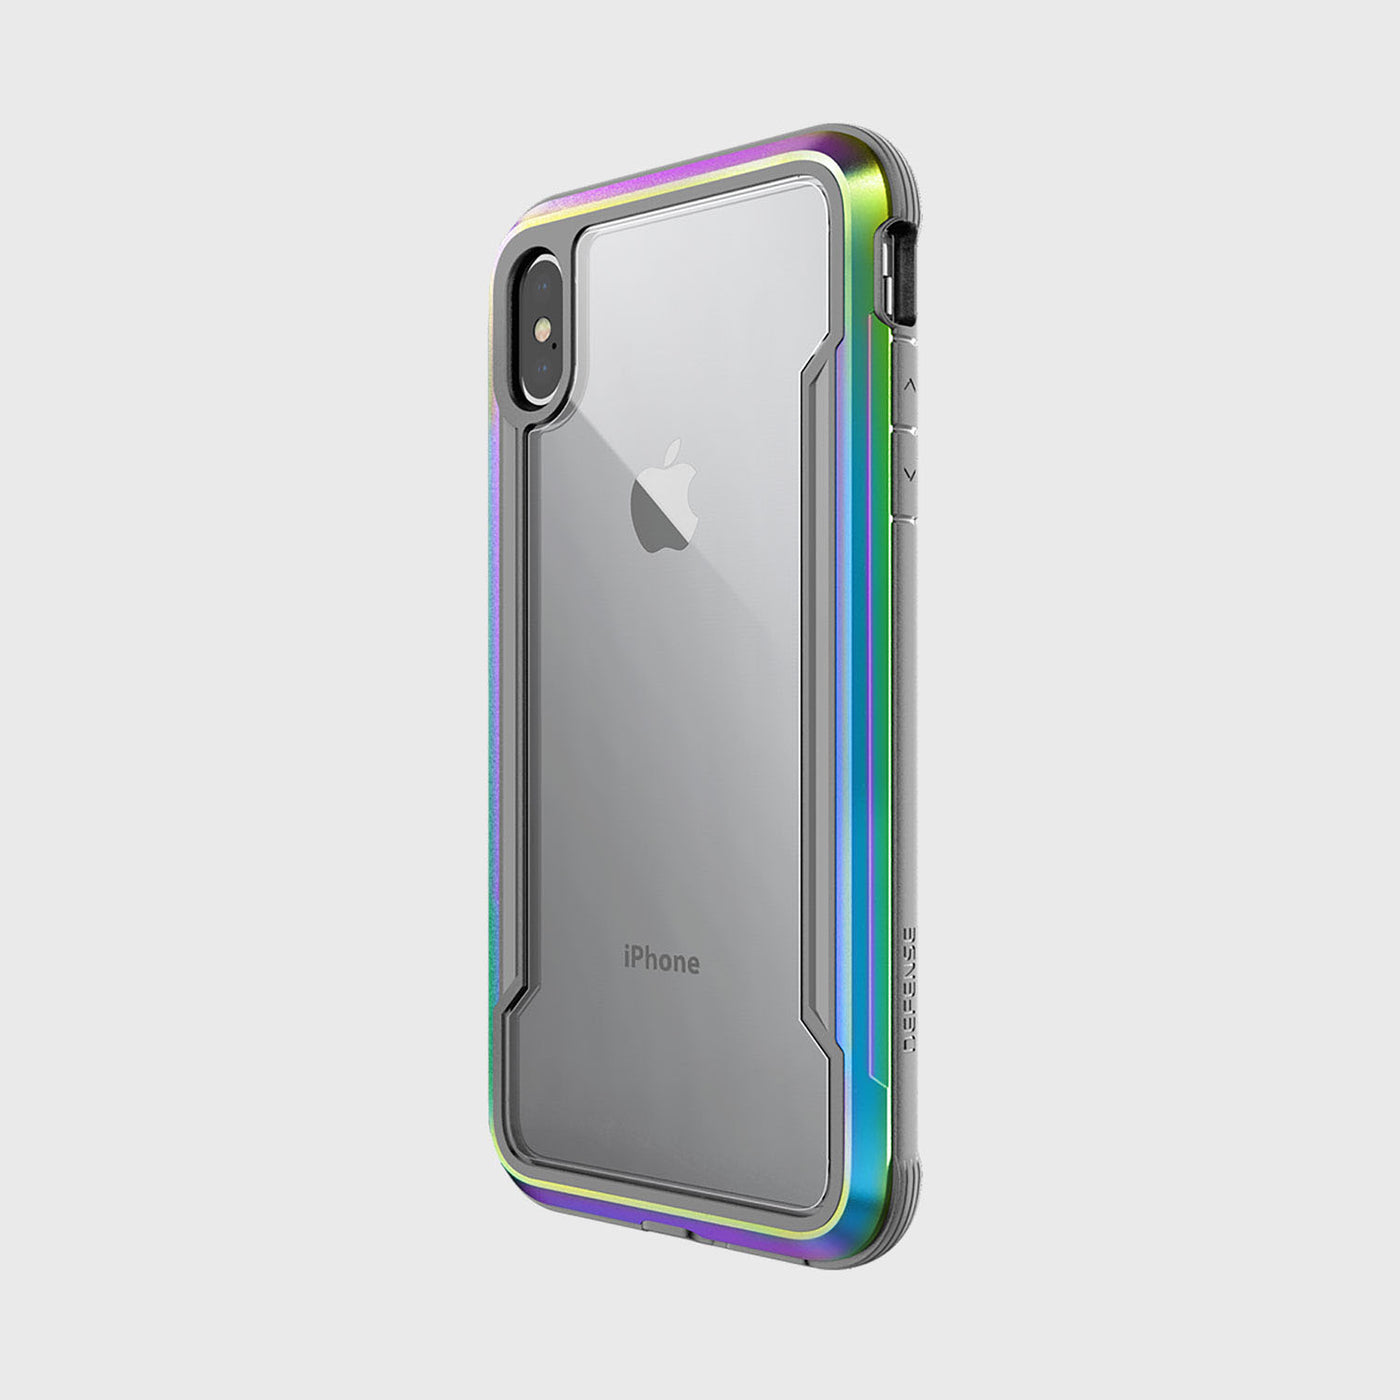 Rugged Case for iPhone XS Max. Raptic Shield in iridescent.